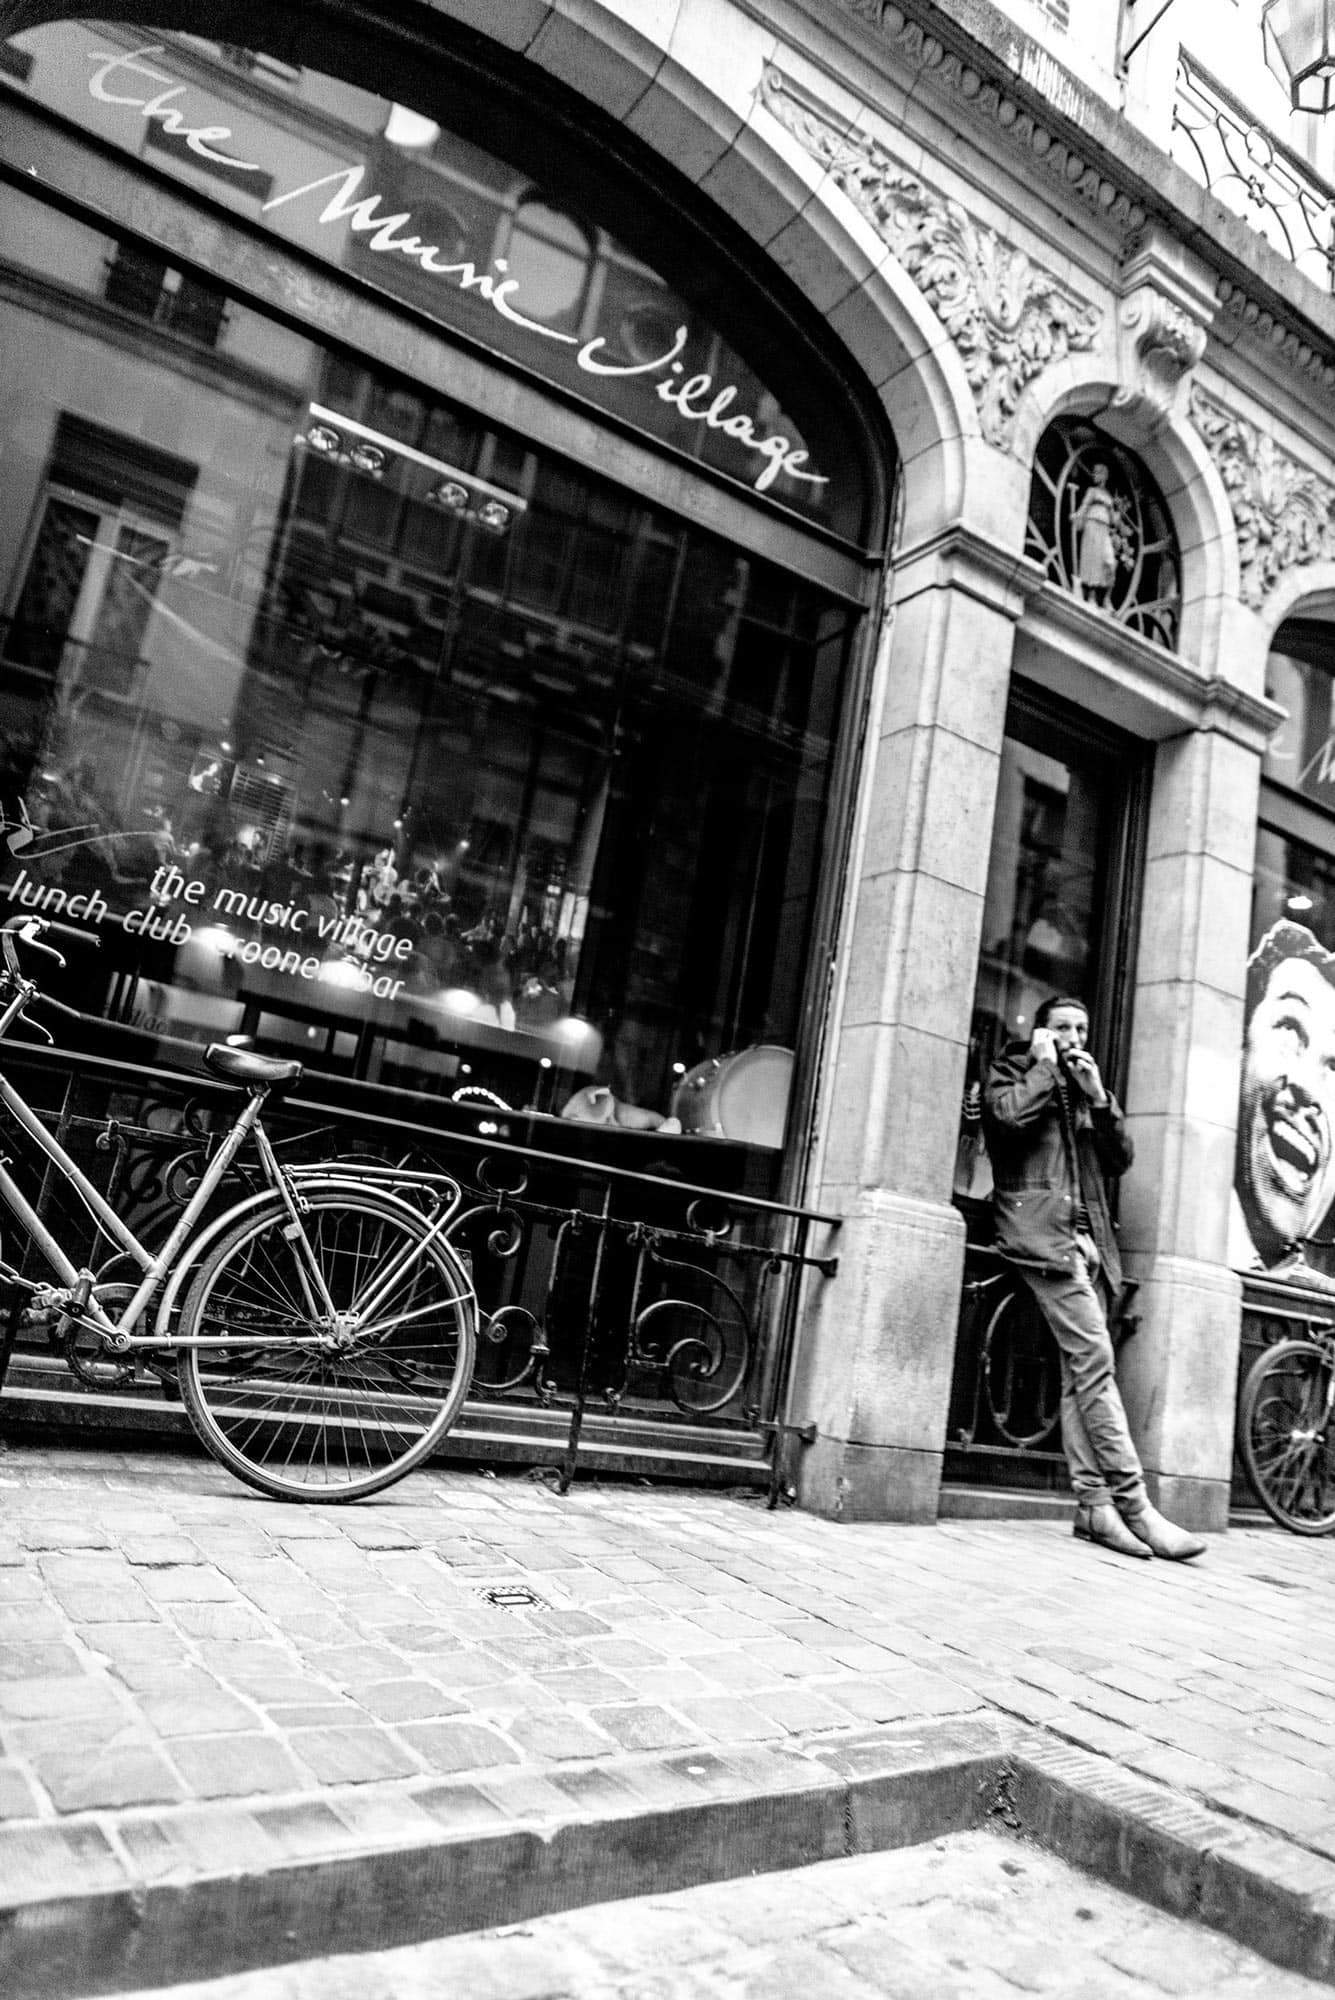 A black and white photo of a man with a bicycle in front of a building.